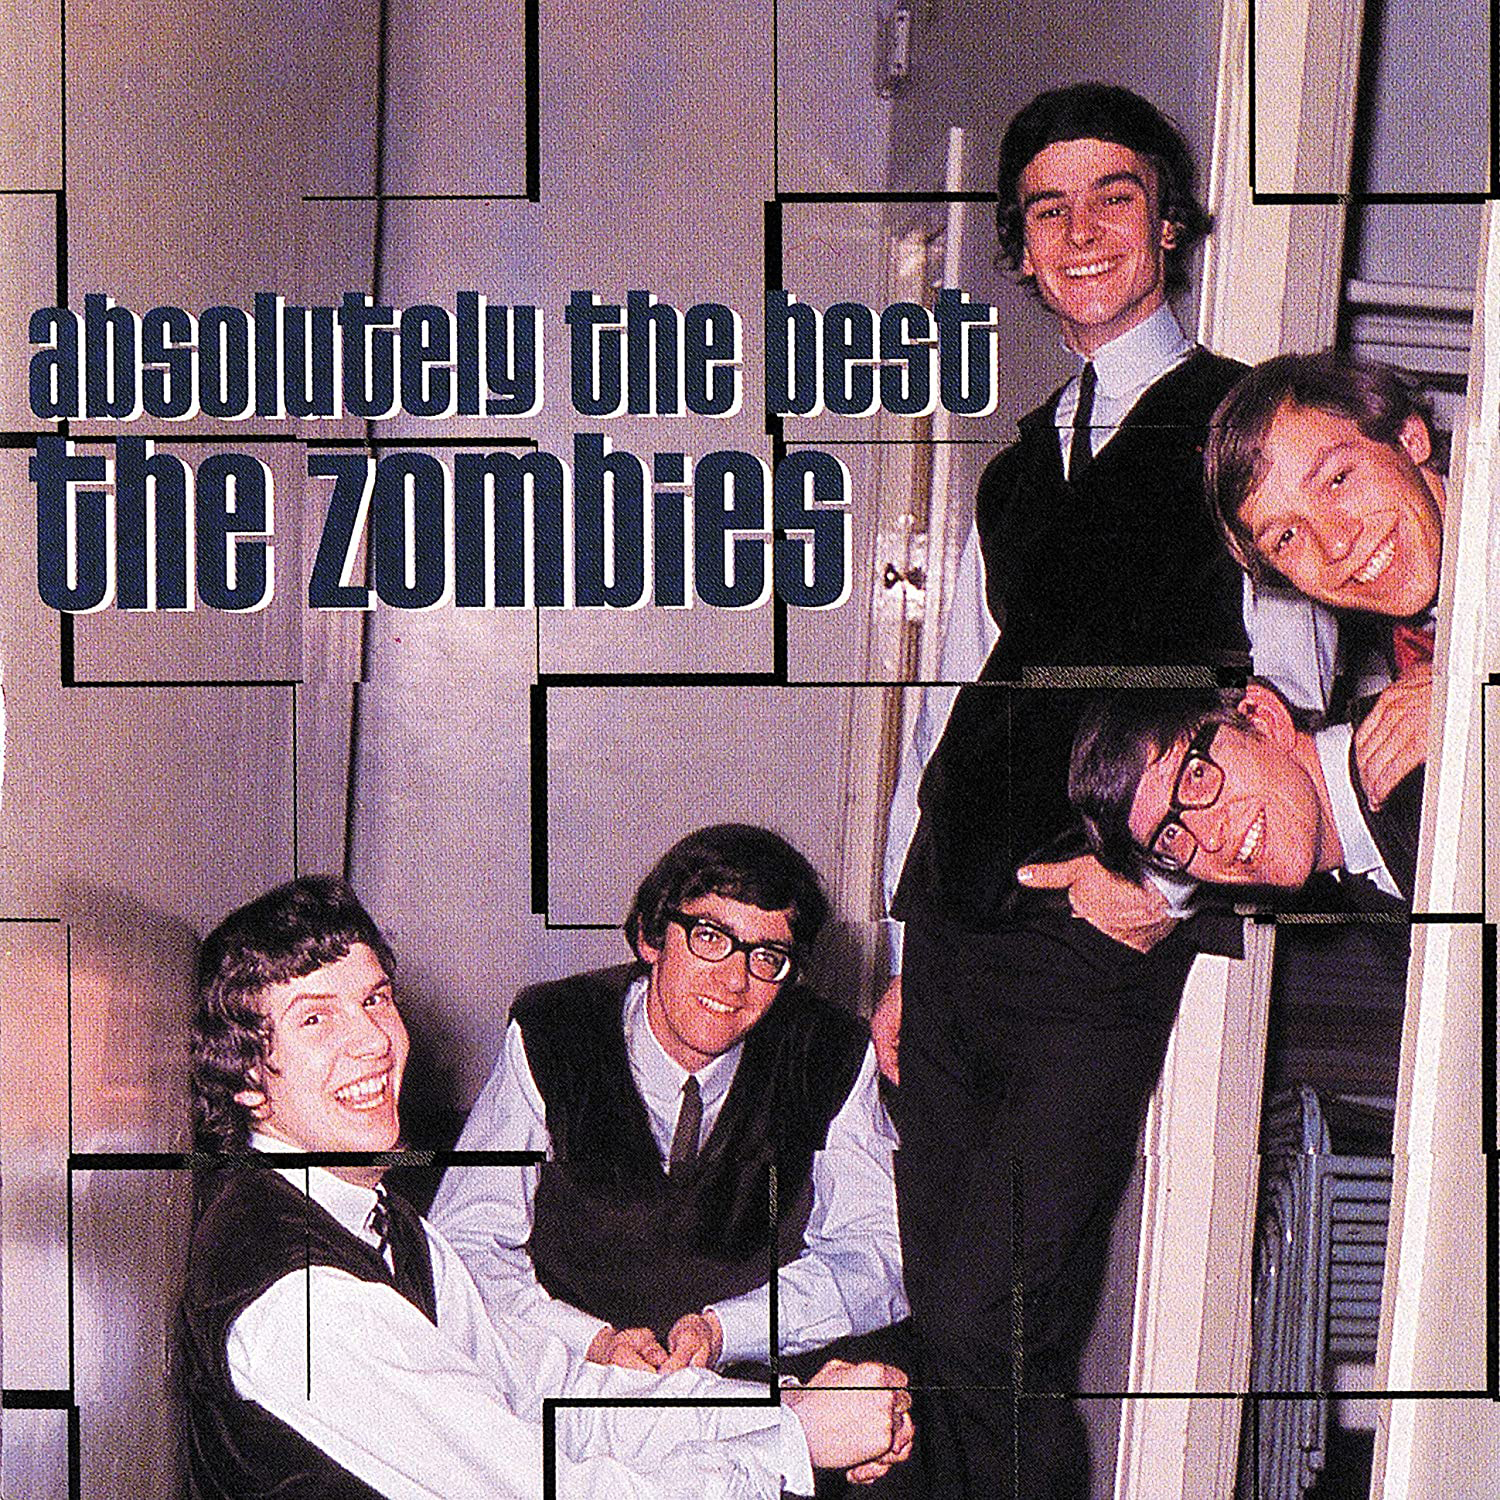 “I Love You” - The Zombies 1965